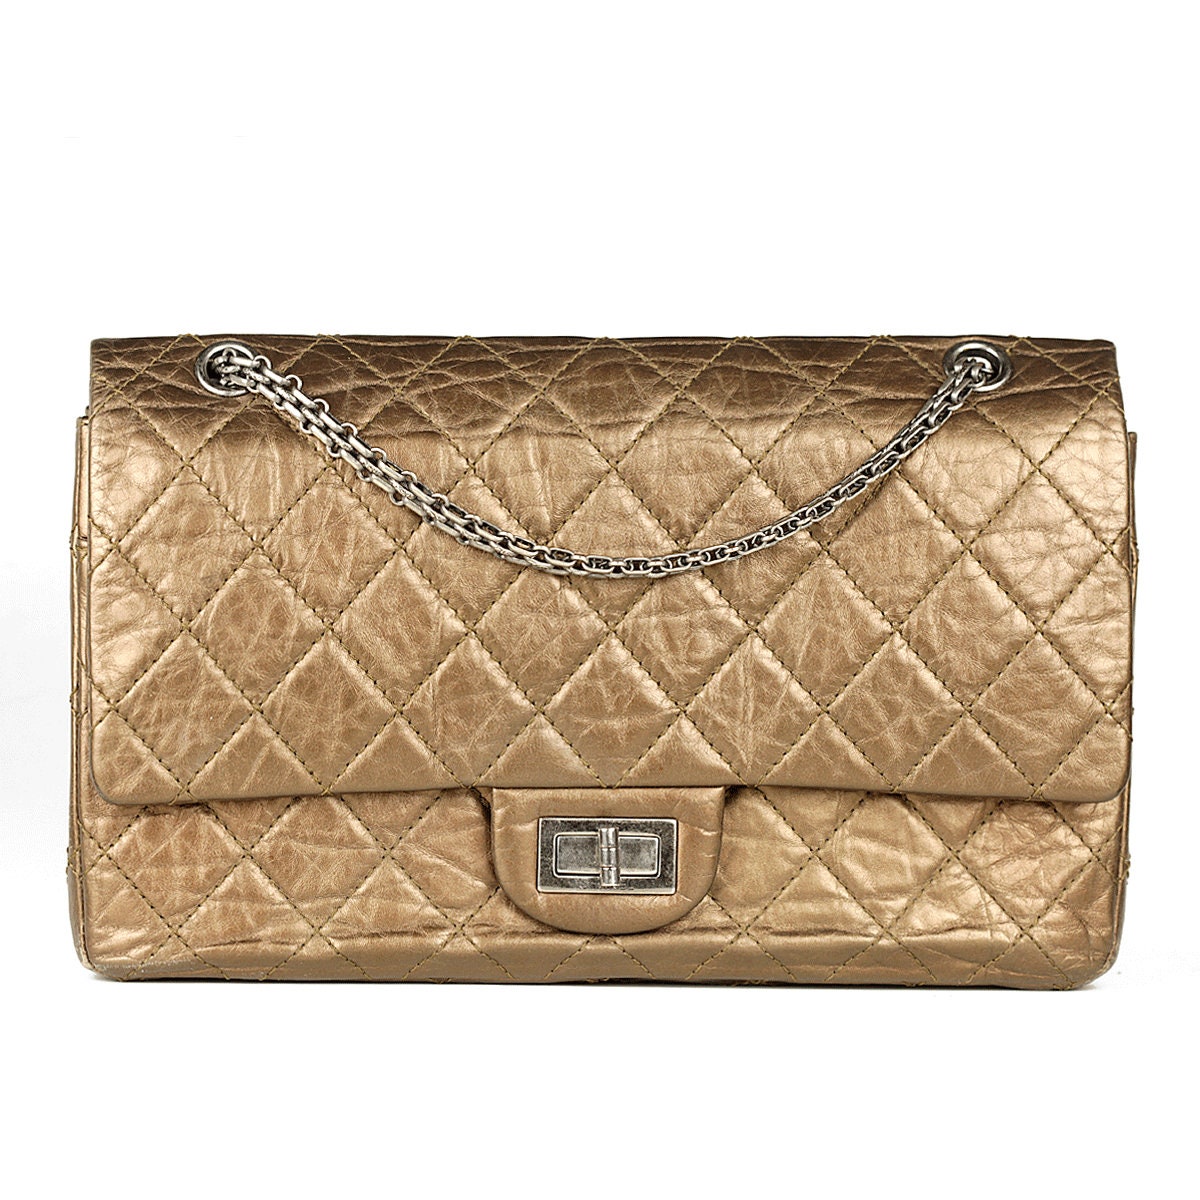 Chanel Boy Bag Quilted Goatskin and Patent Leather Medium Duo Ruthenium  Hardware